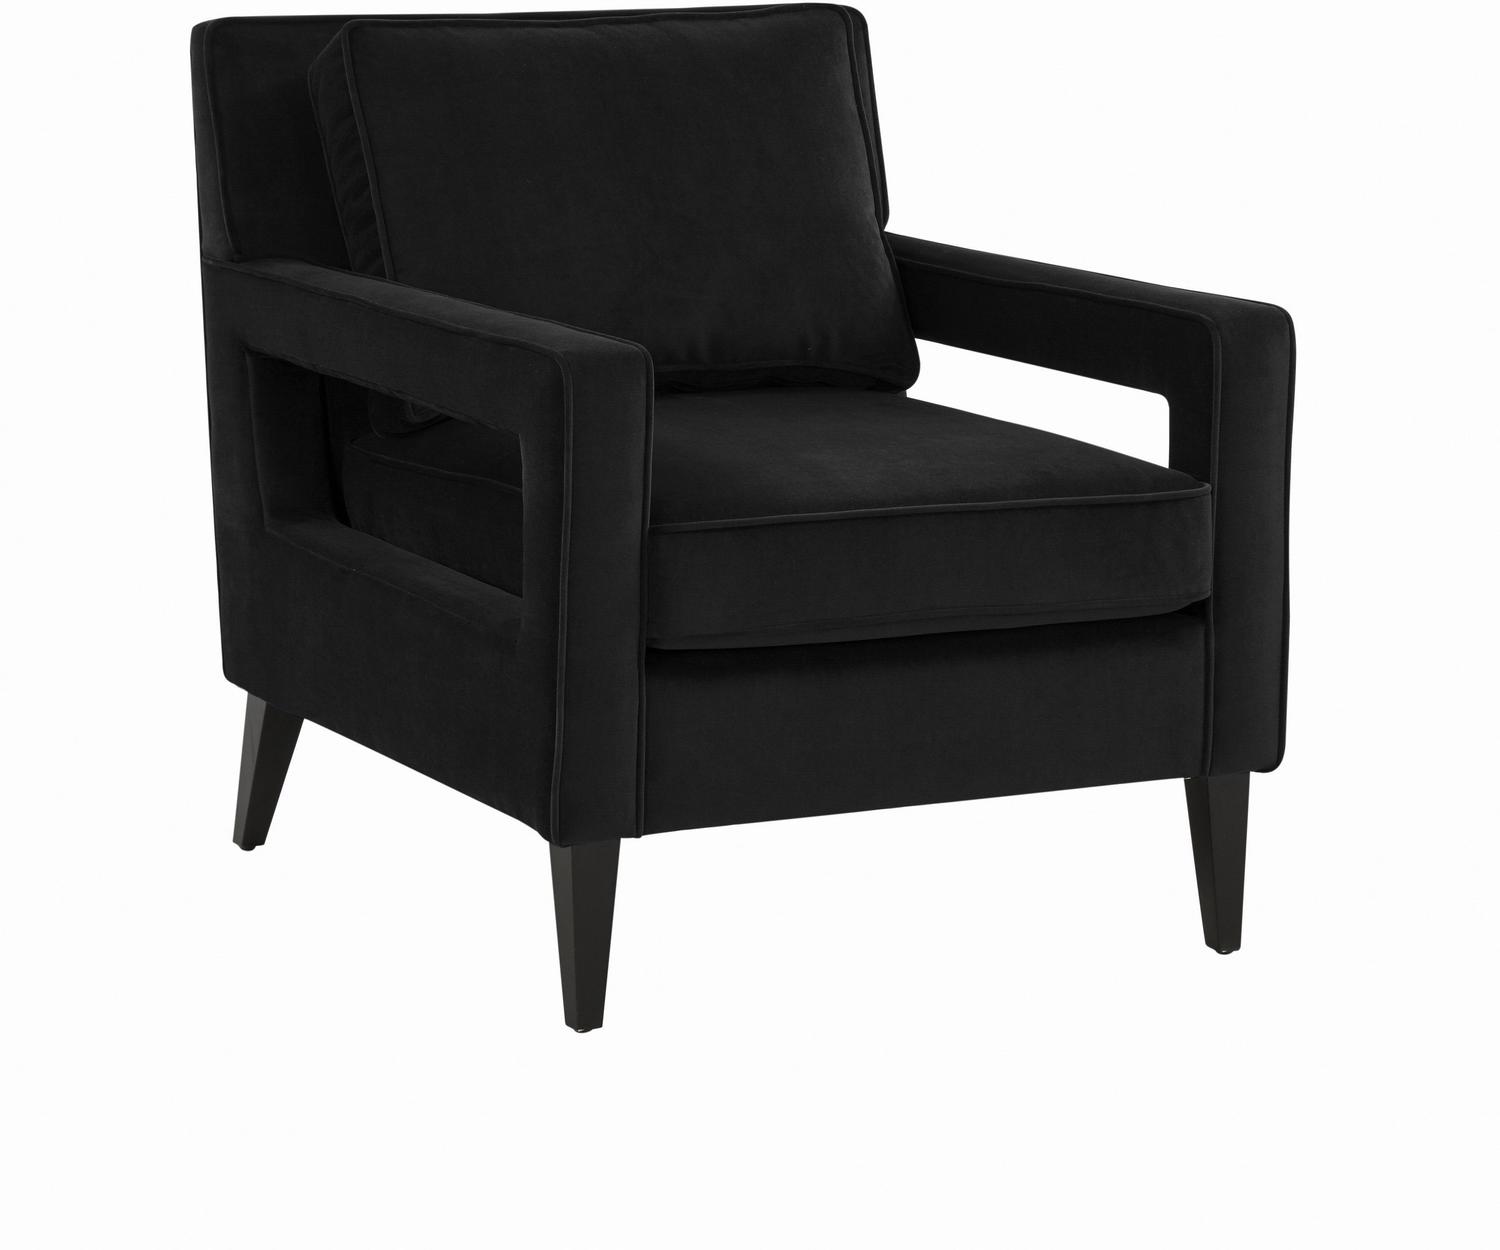 charcoal velvet armchair Tov Furniture Accent Chairs Black